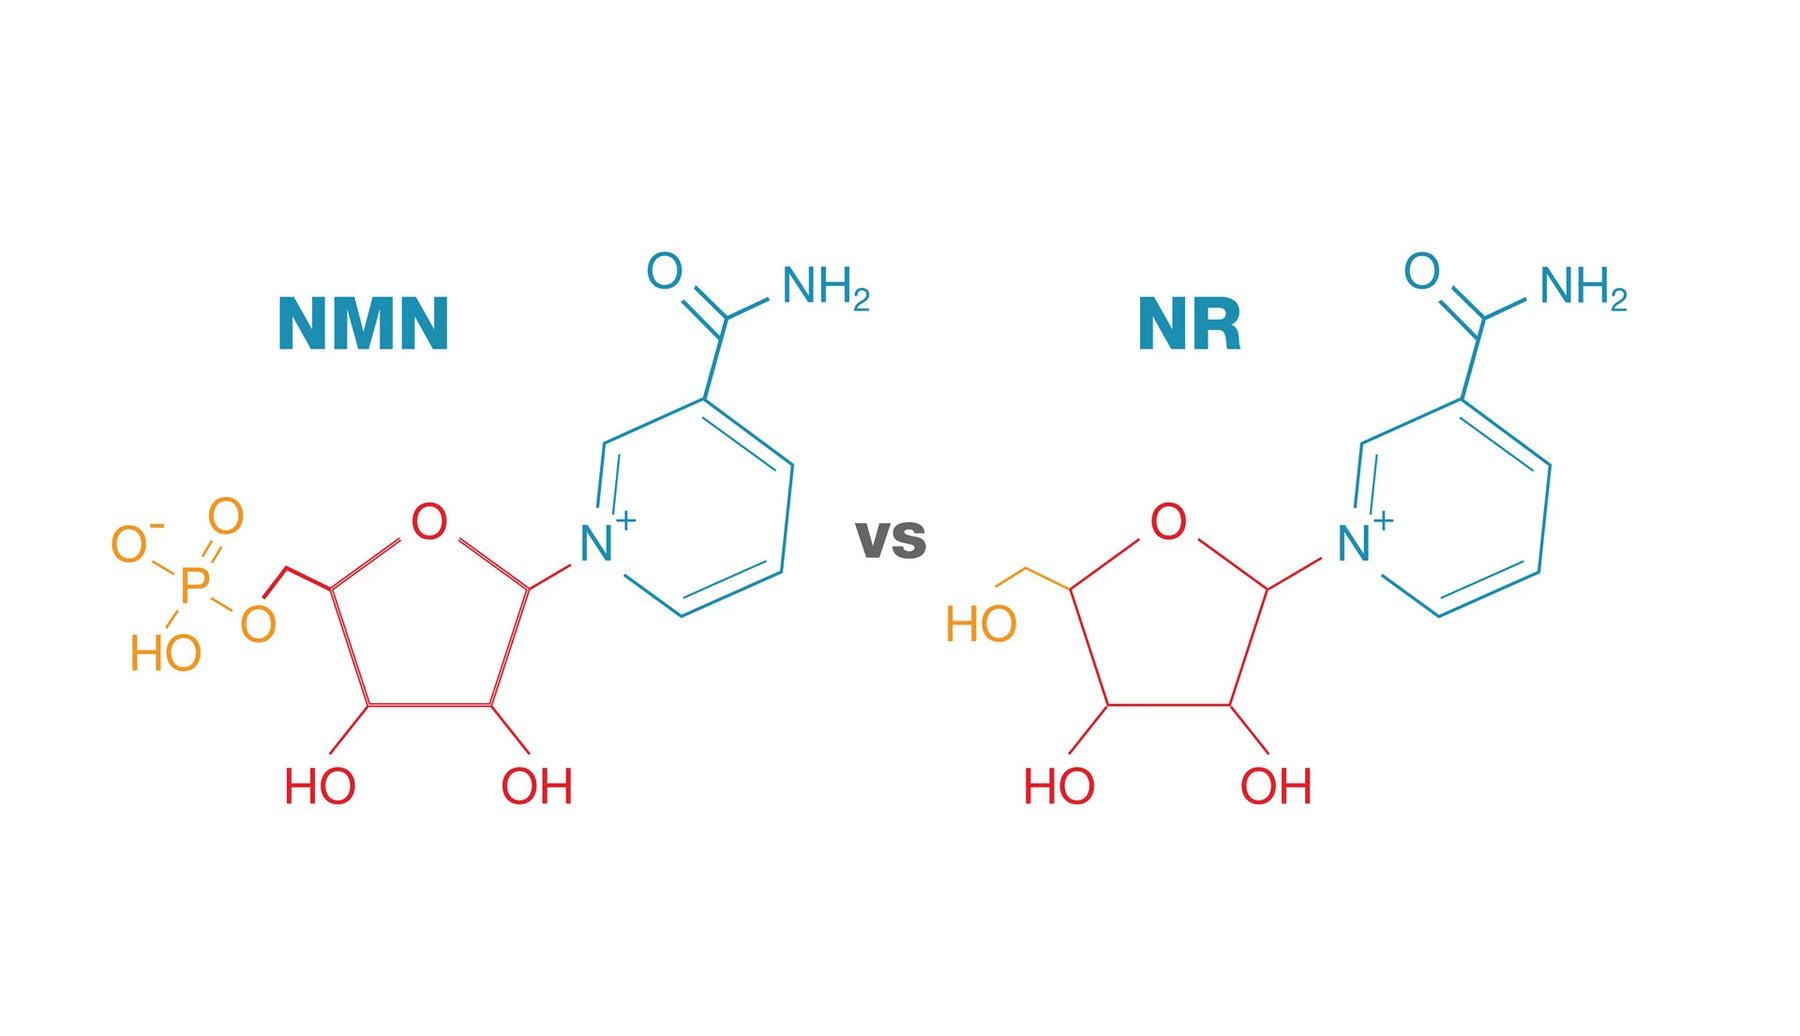 What are the differences between NMN and NR?